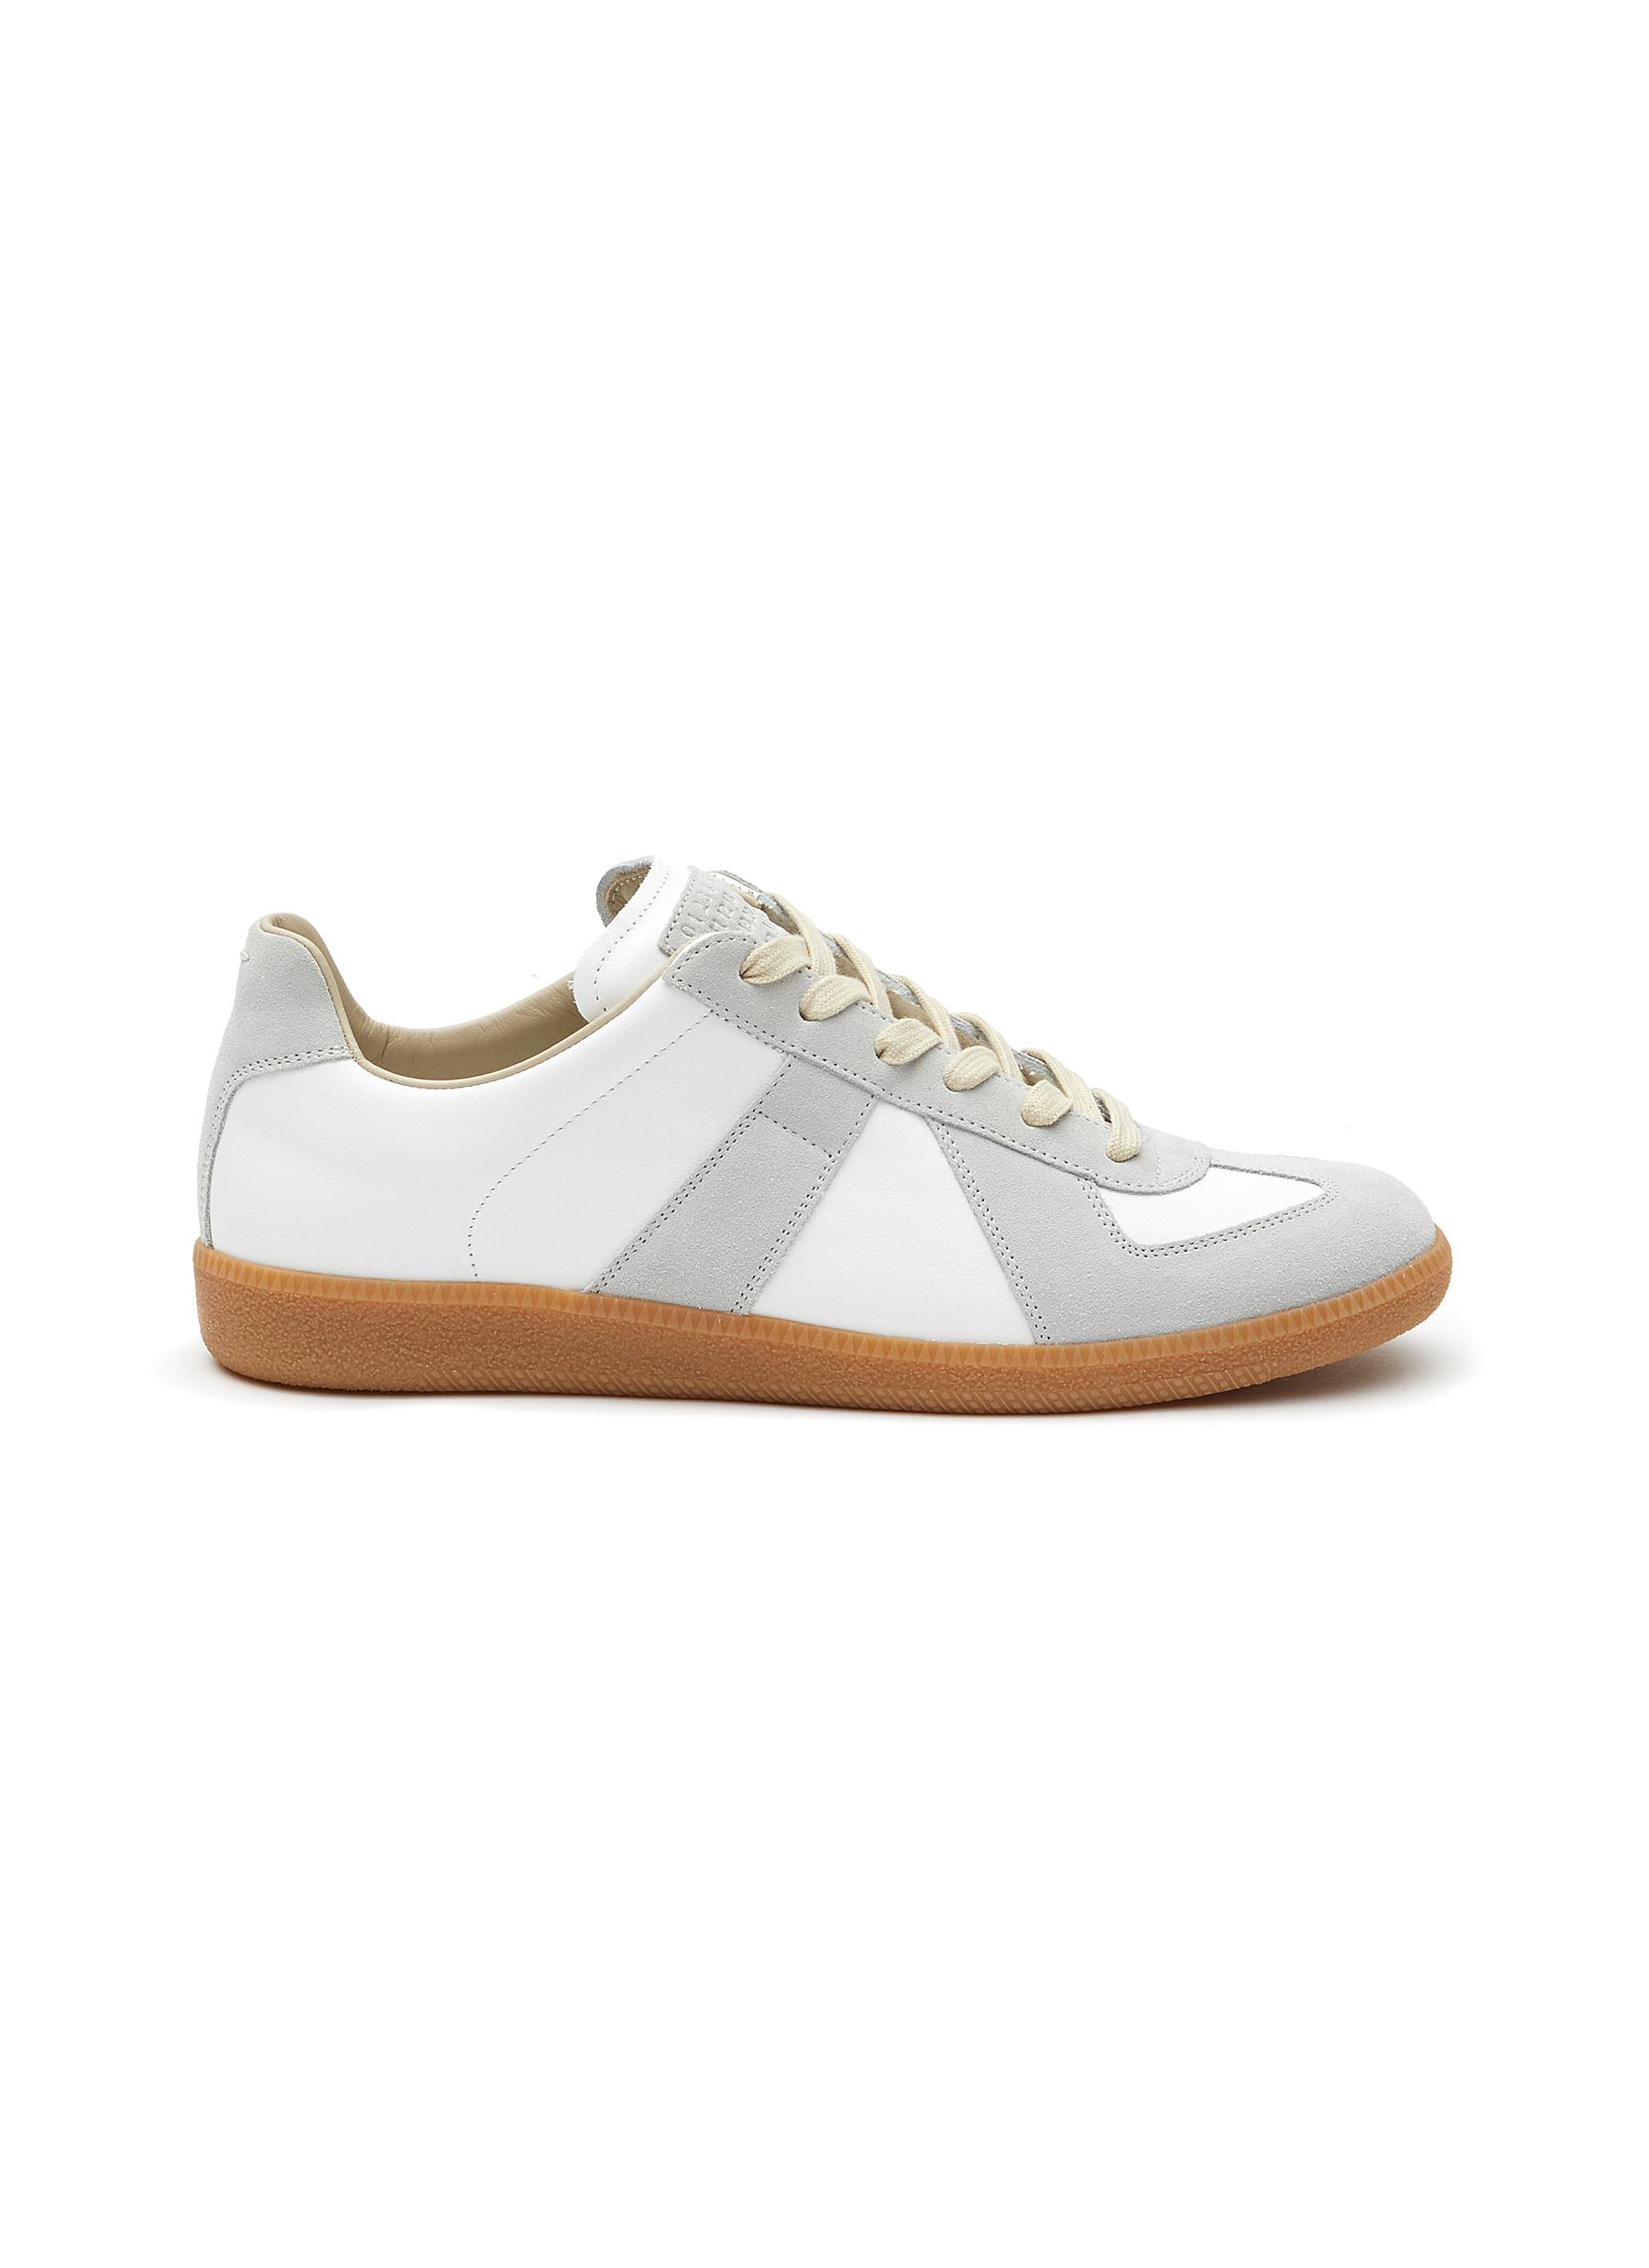 ‘Replica' Leather Low Top Sneakers